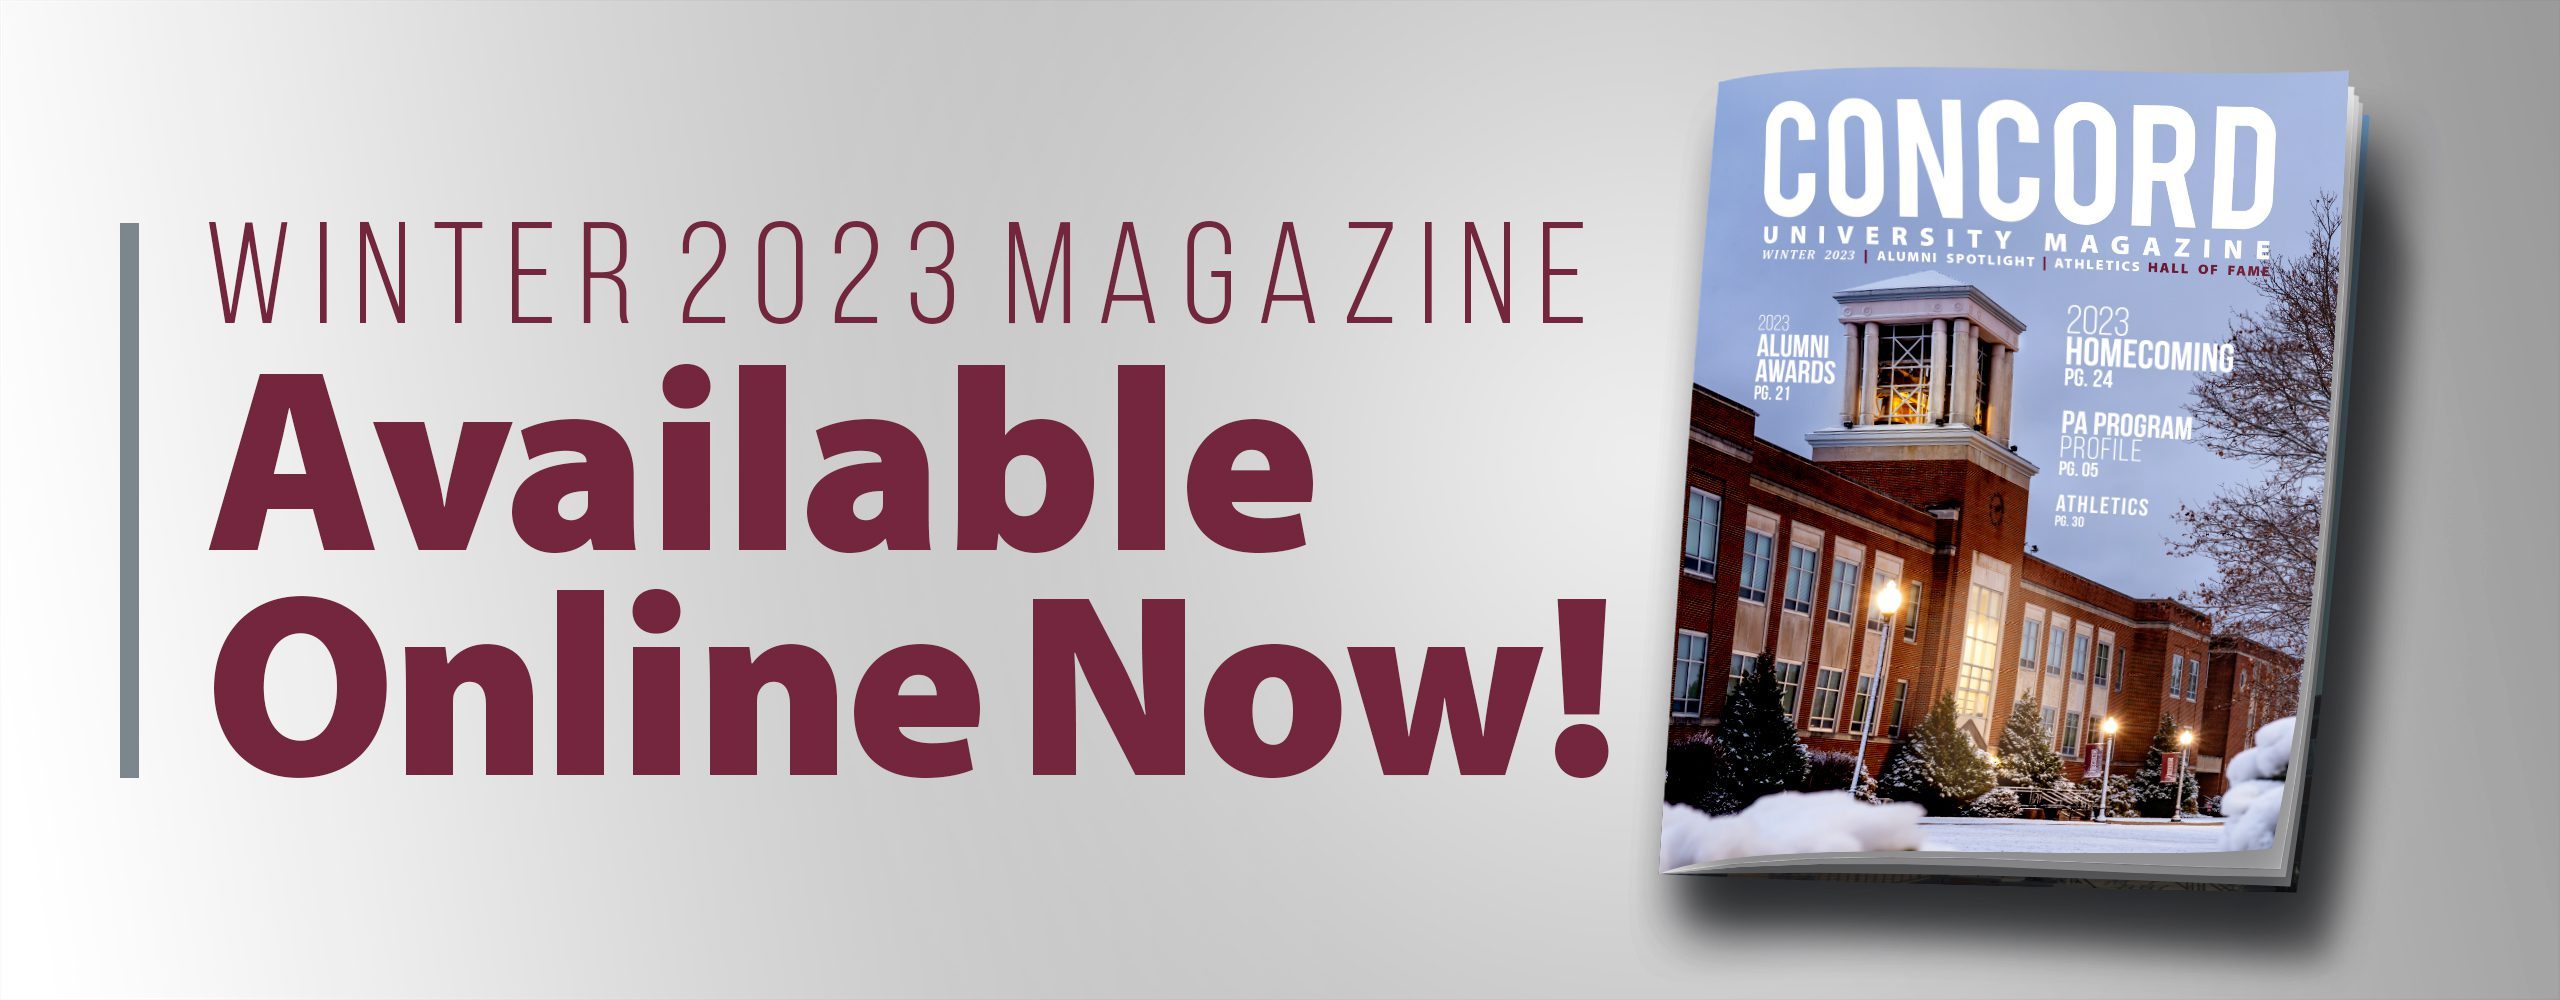 An image of the Concord University Magazine with text that reads "Winter 2023 Magazine Available Online Now!"